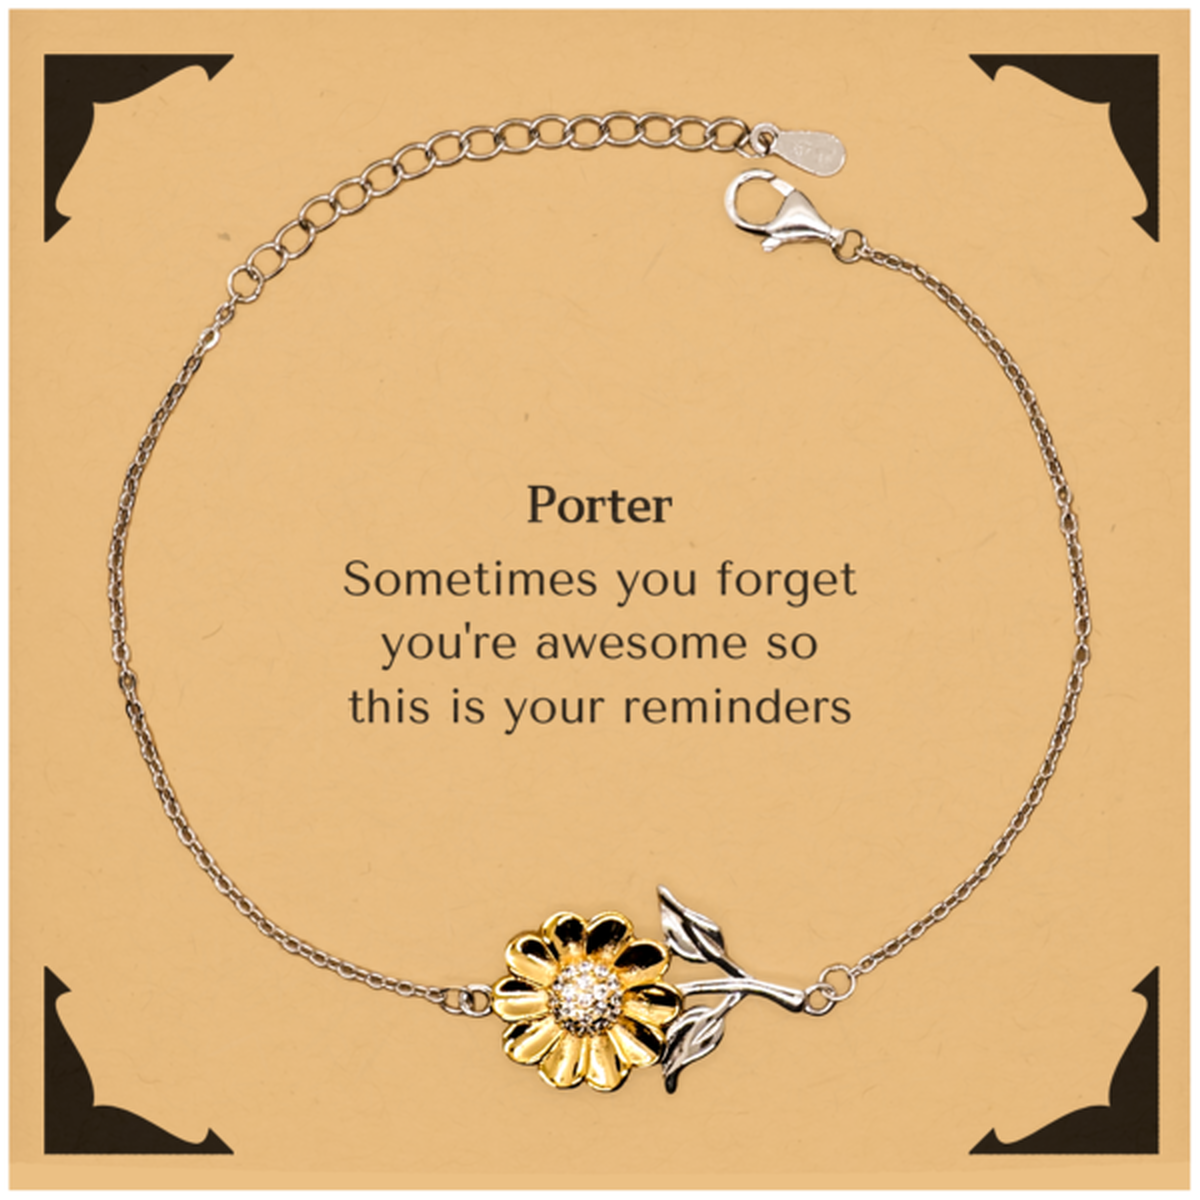 Sentimental Porter Sunflower Bracelet, Porter Sometimes you forget you're awesome so this is your reminders, Graduation Christmas Birthday Gifts for Porter, Men, Women, Coworkers